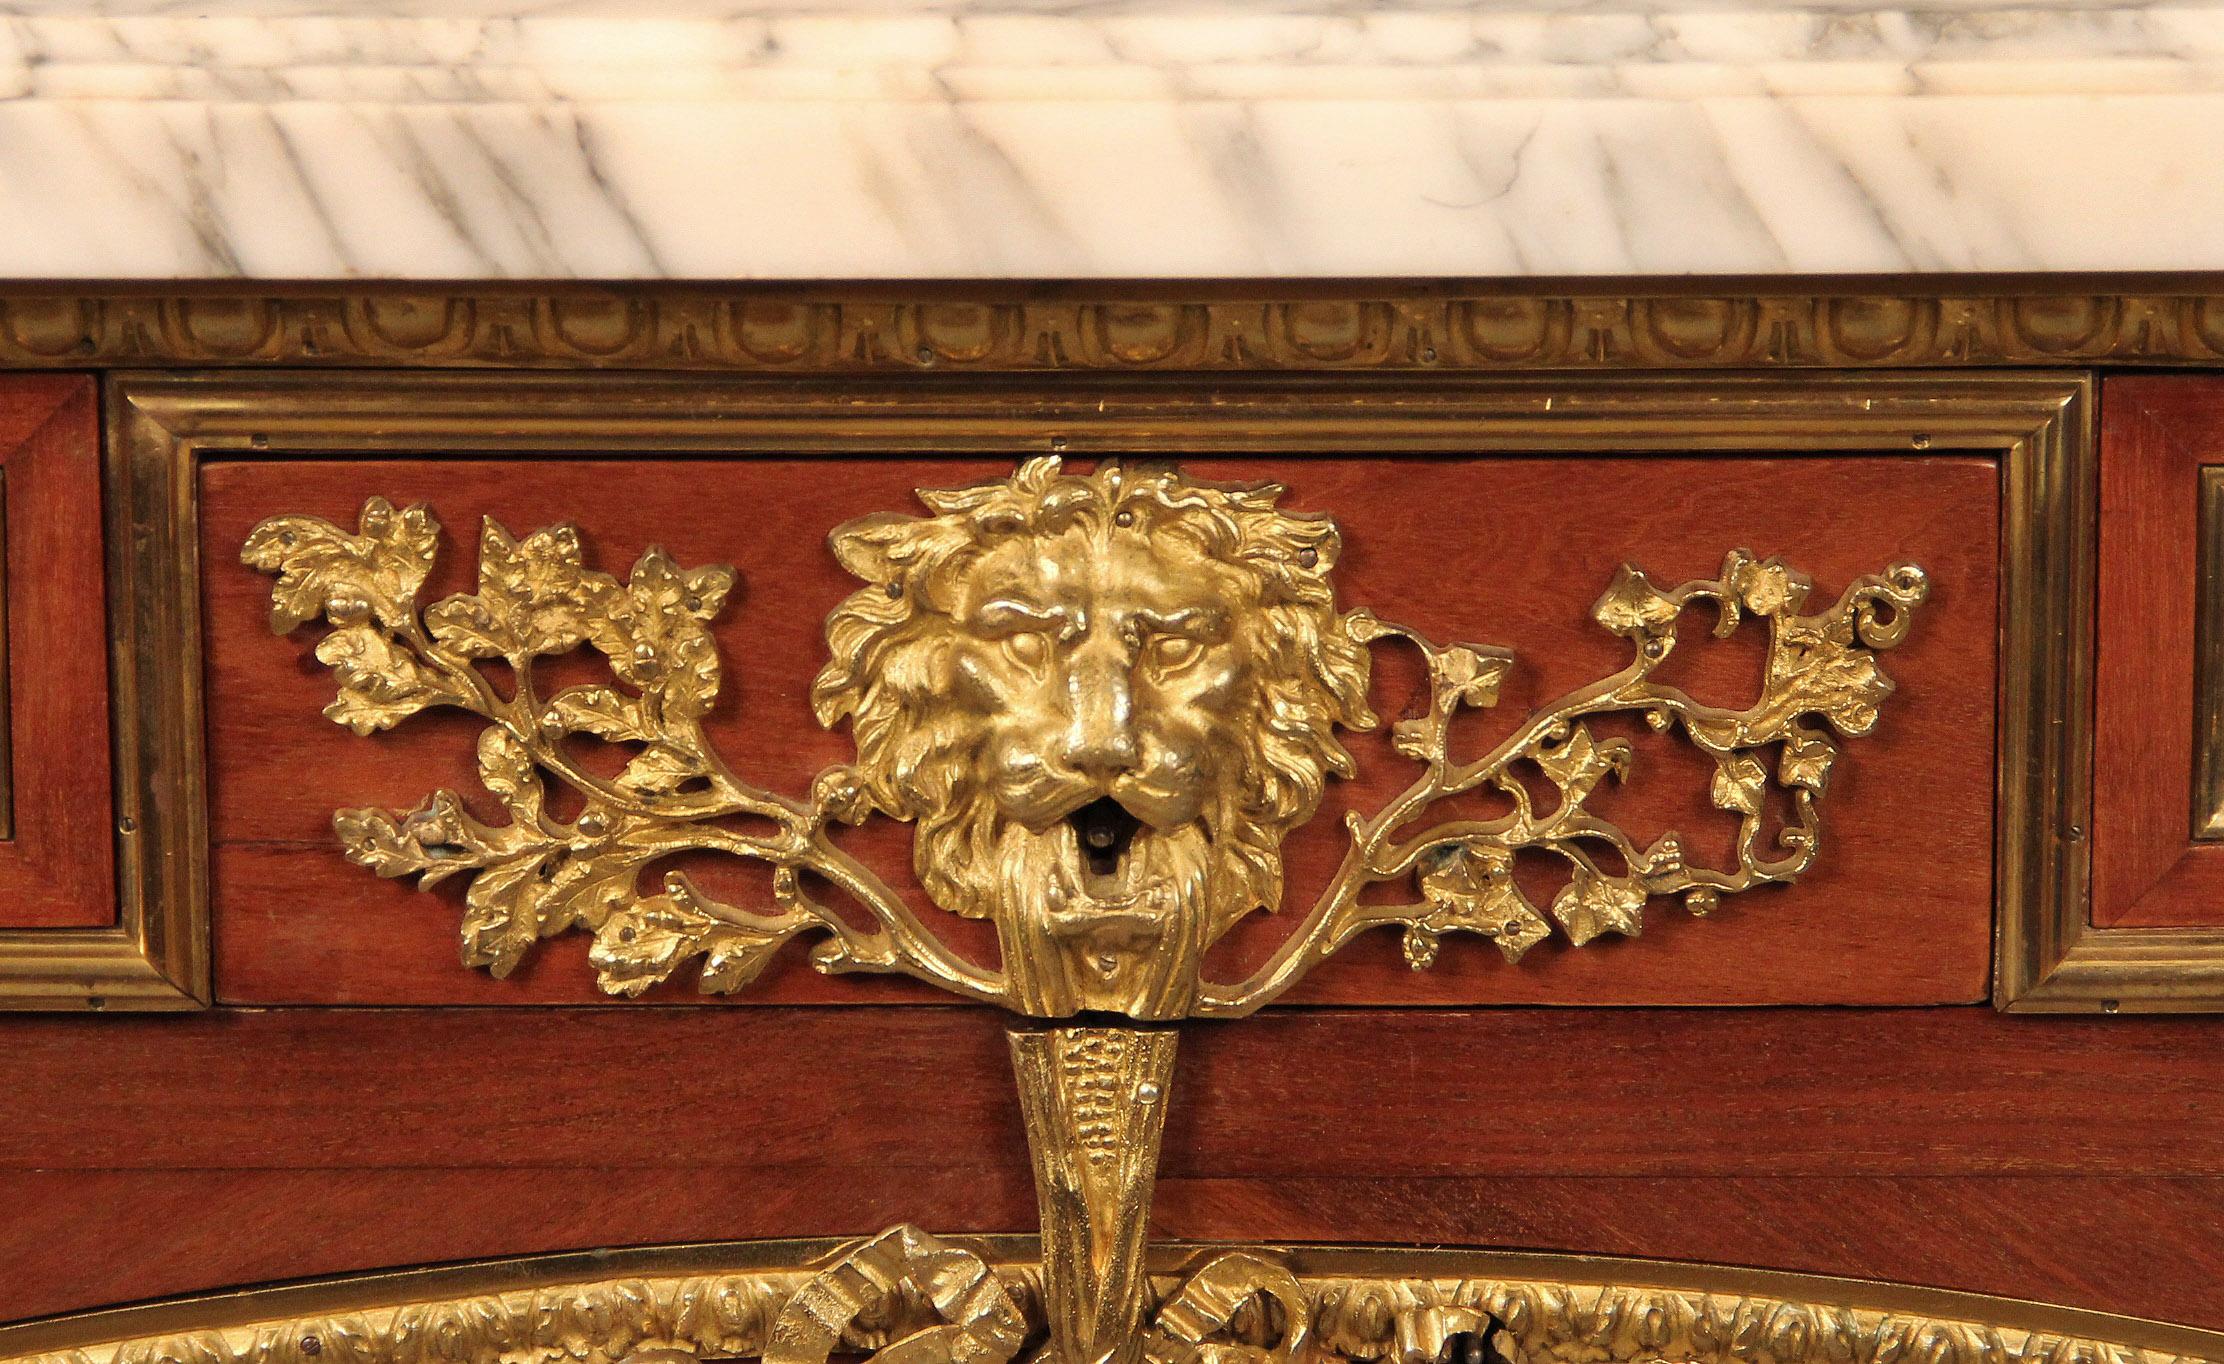 A nice quality late 19th century Louis XVI style gilt bronze mounted commode A Vantaux by Léon Kahn

Léon Kahn

A white marble top above a frieze applied with scrolling-vine mounts and fronted by three drawers centered by a lion’s mask and oak